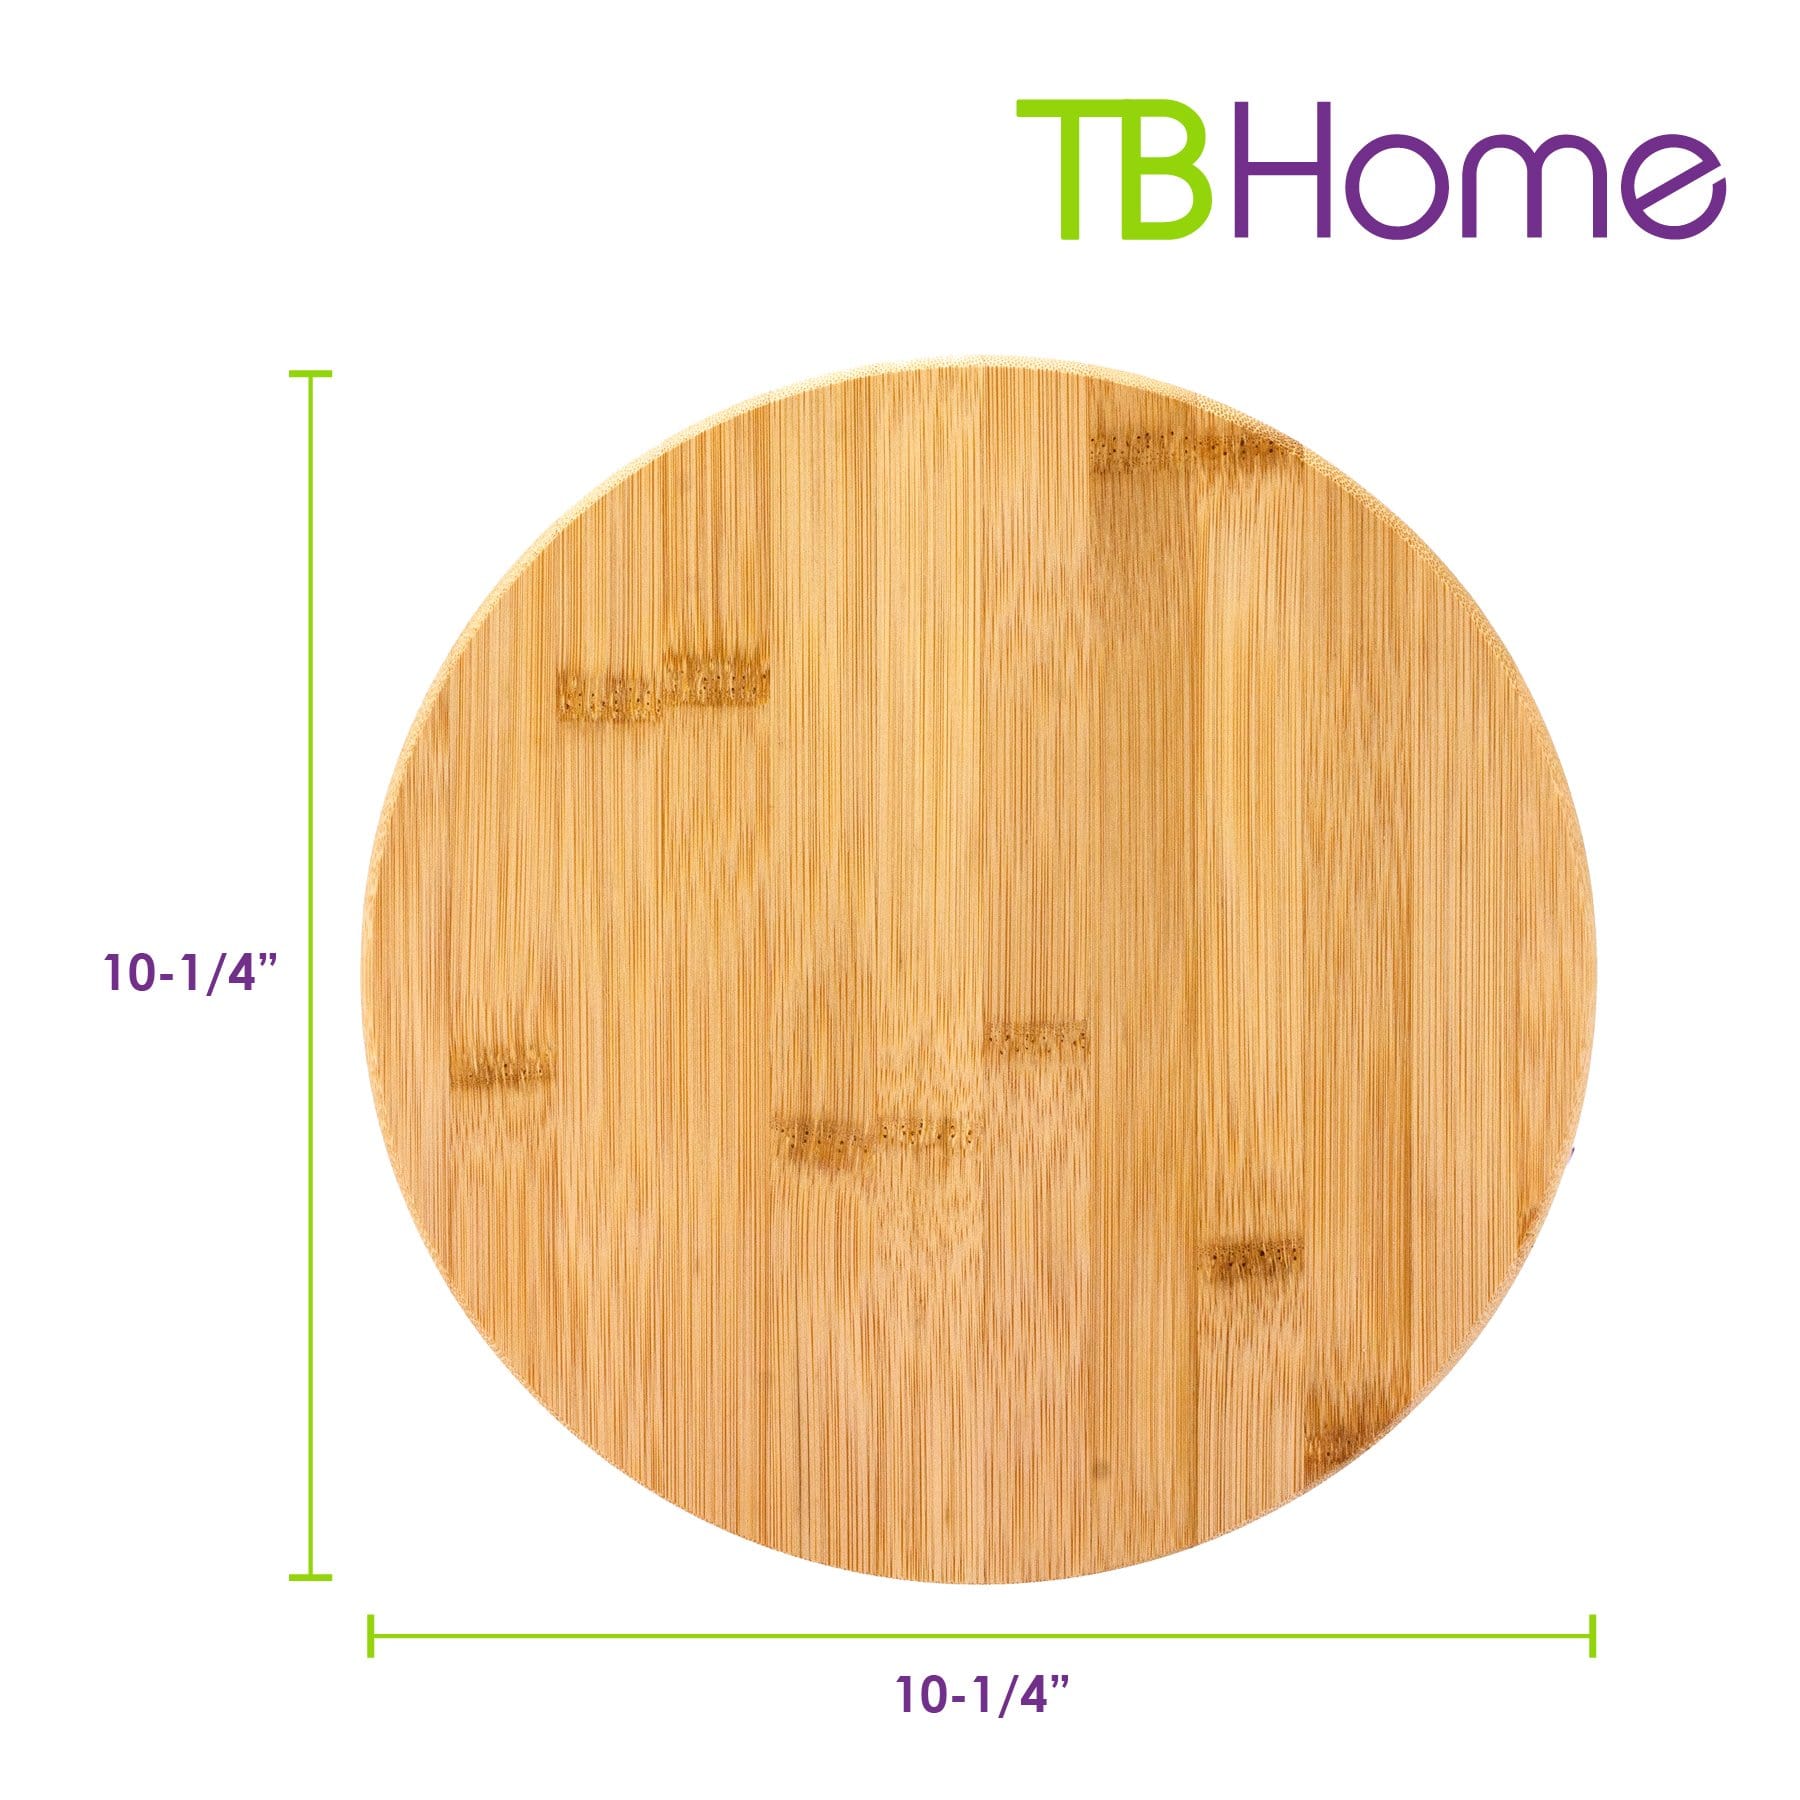 Totally Bamboo TB Home 10" Lazy Susan